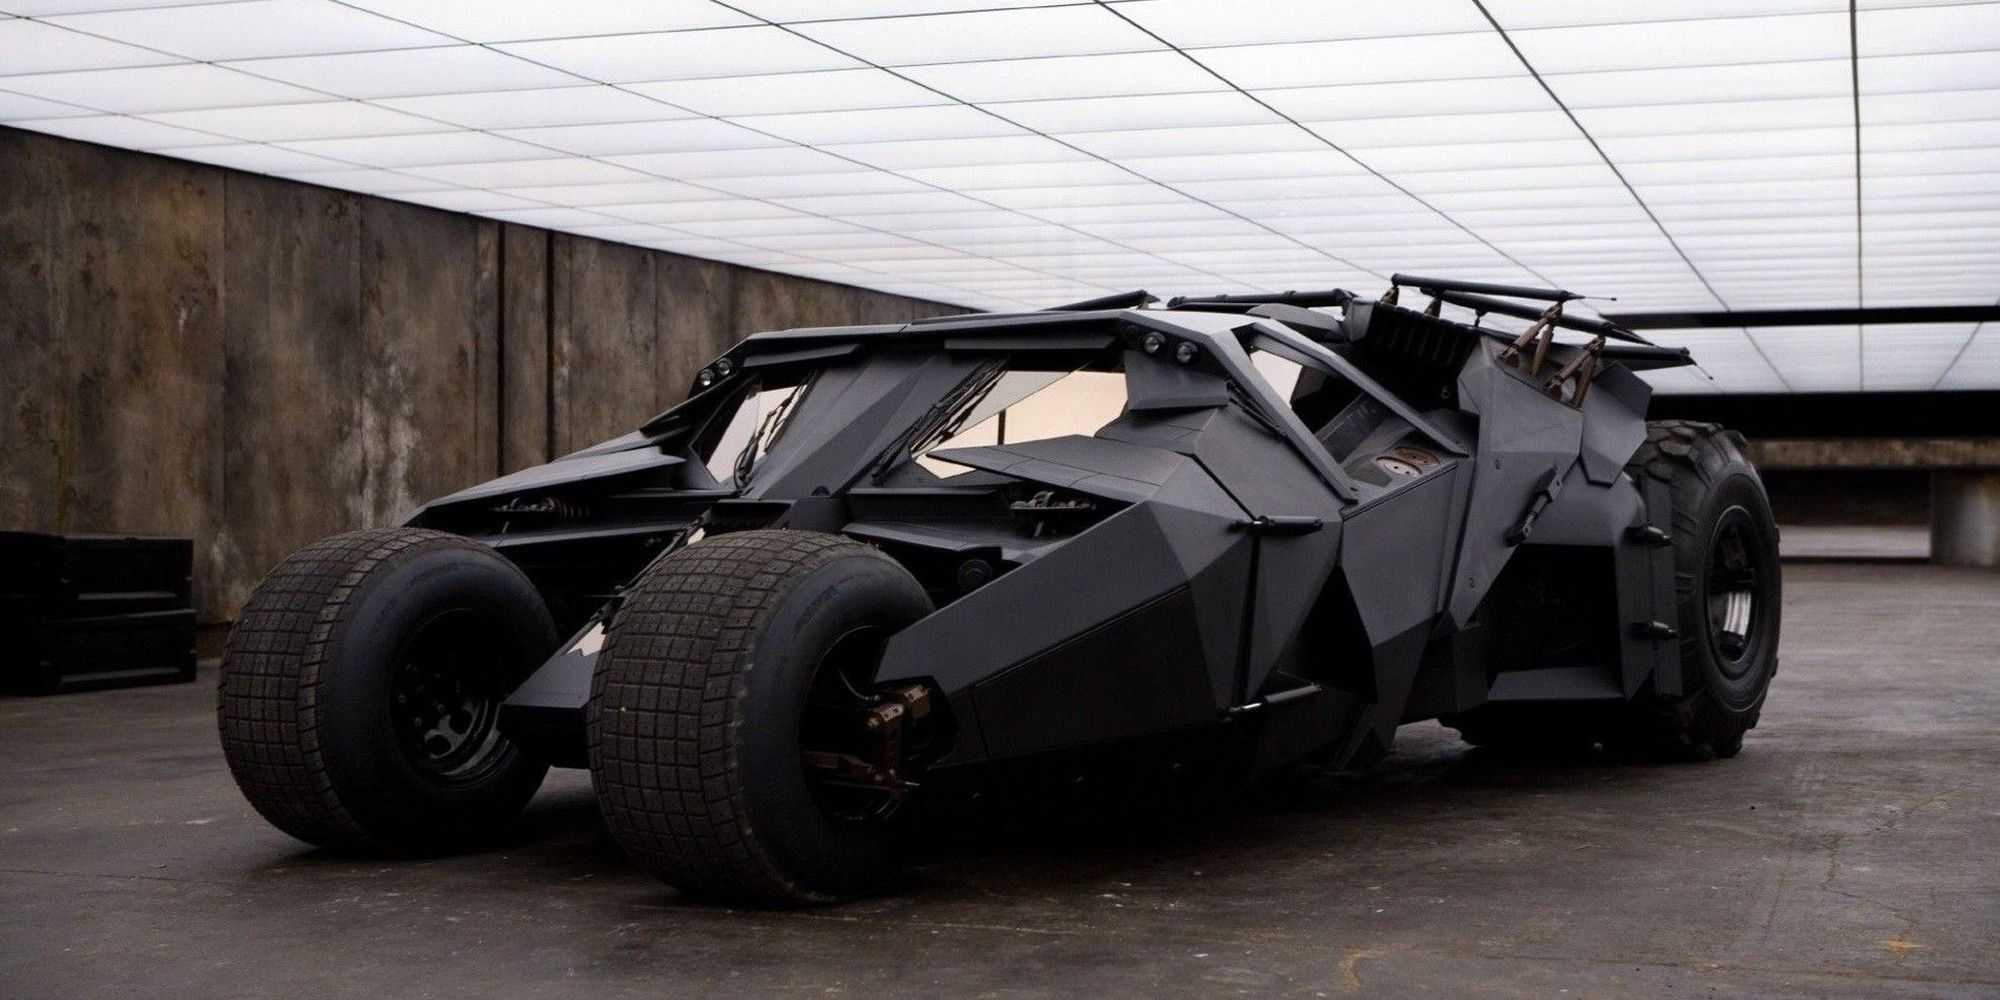 The front of the Tumbler